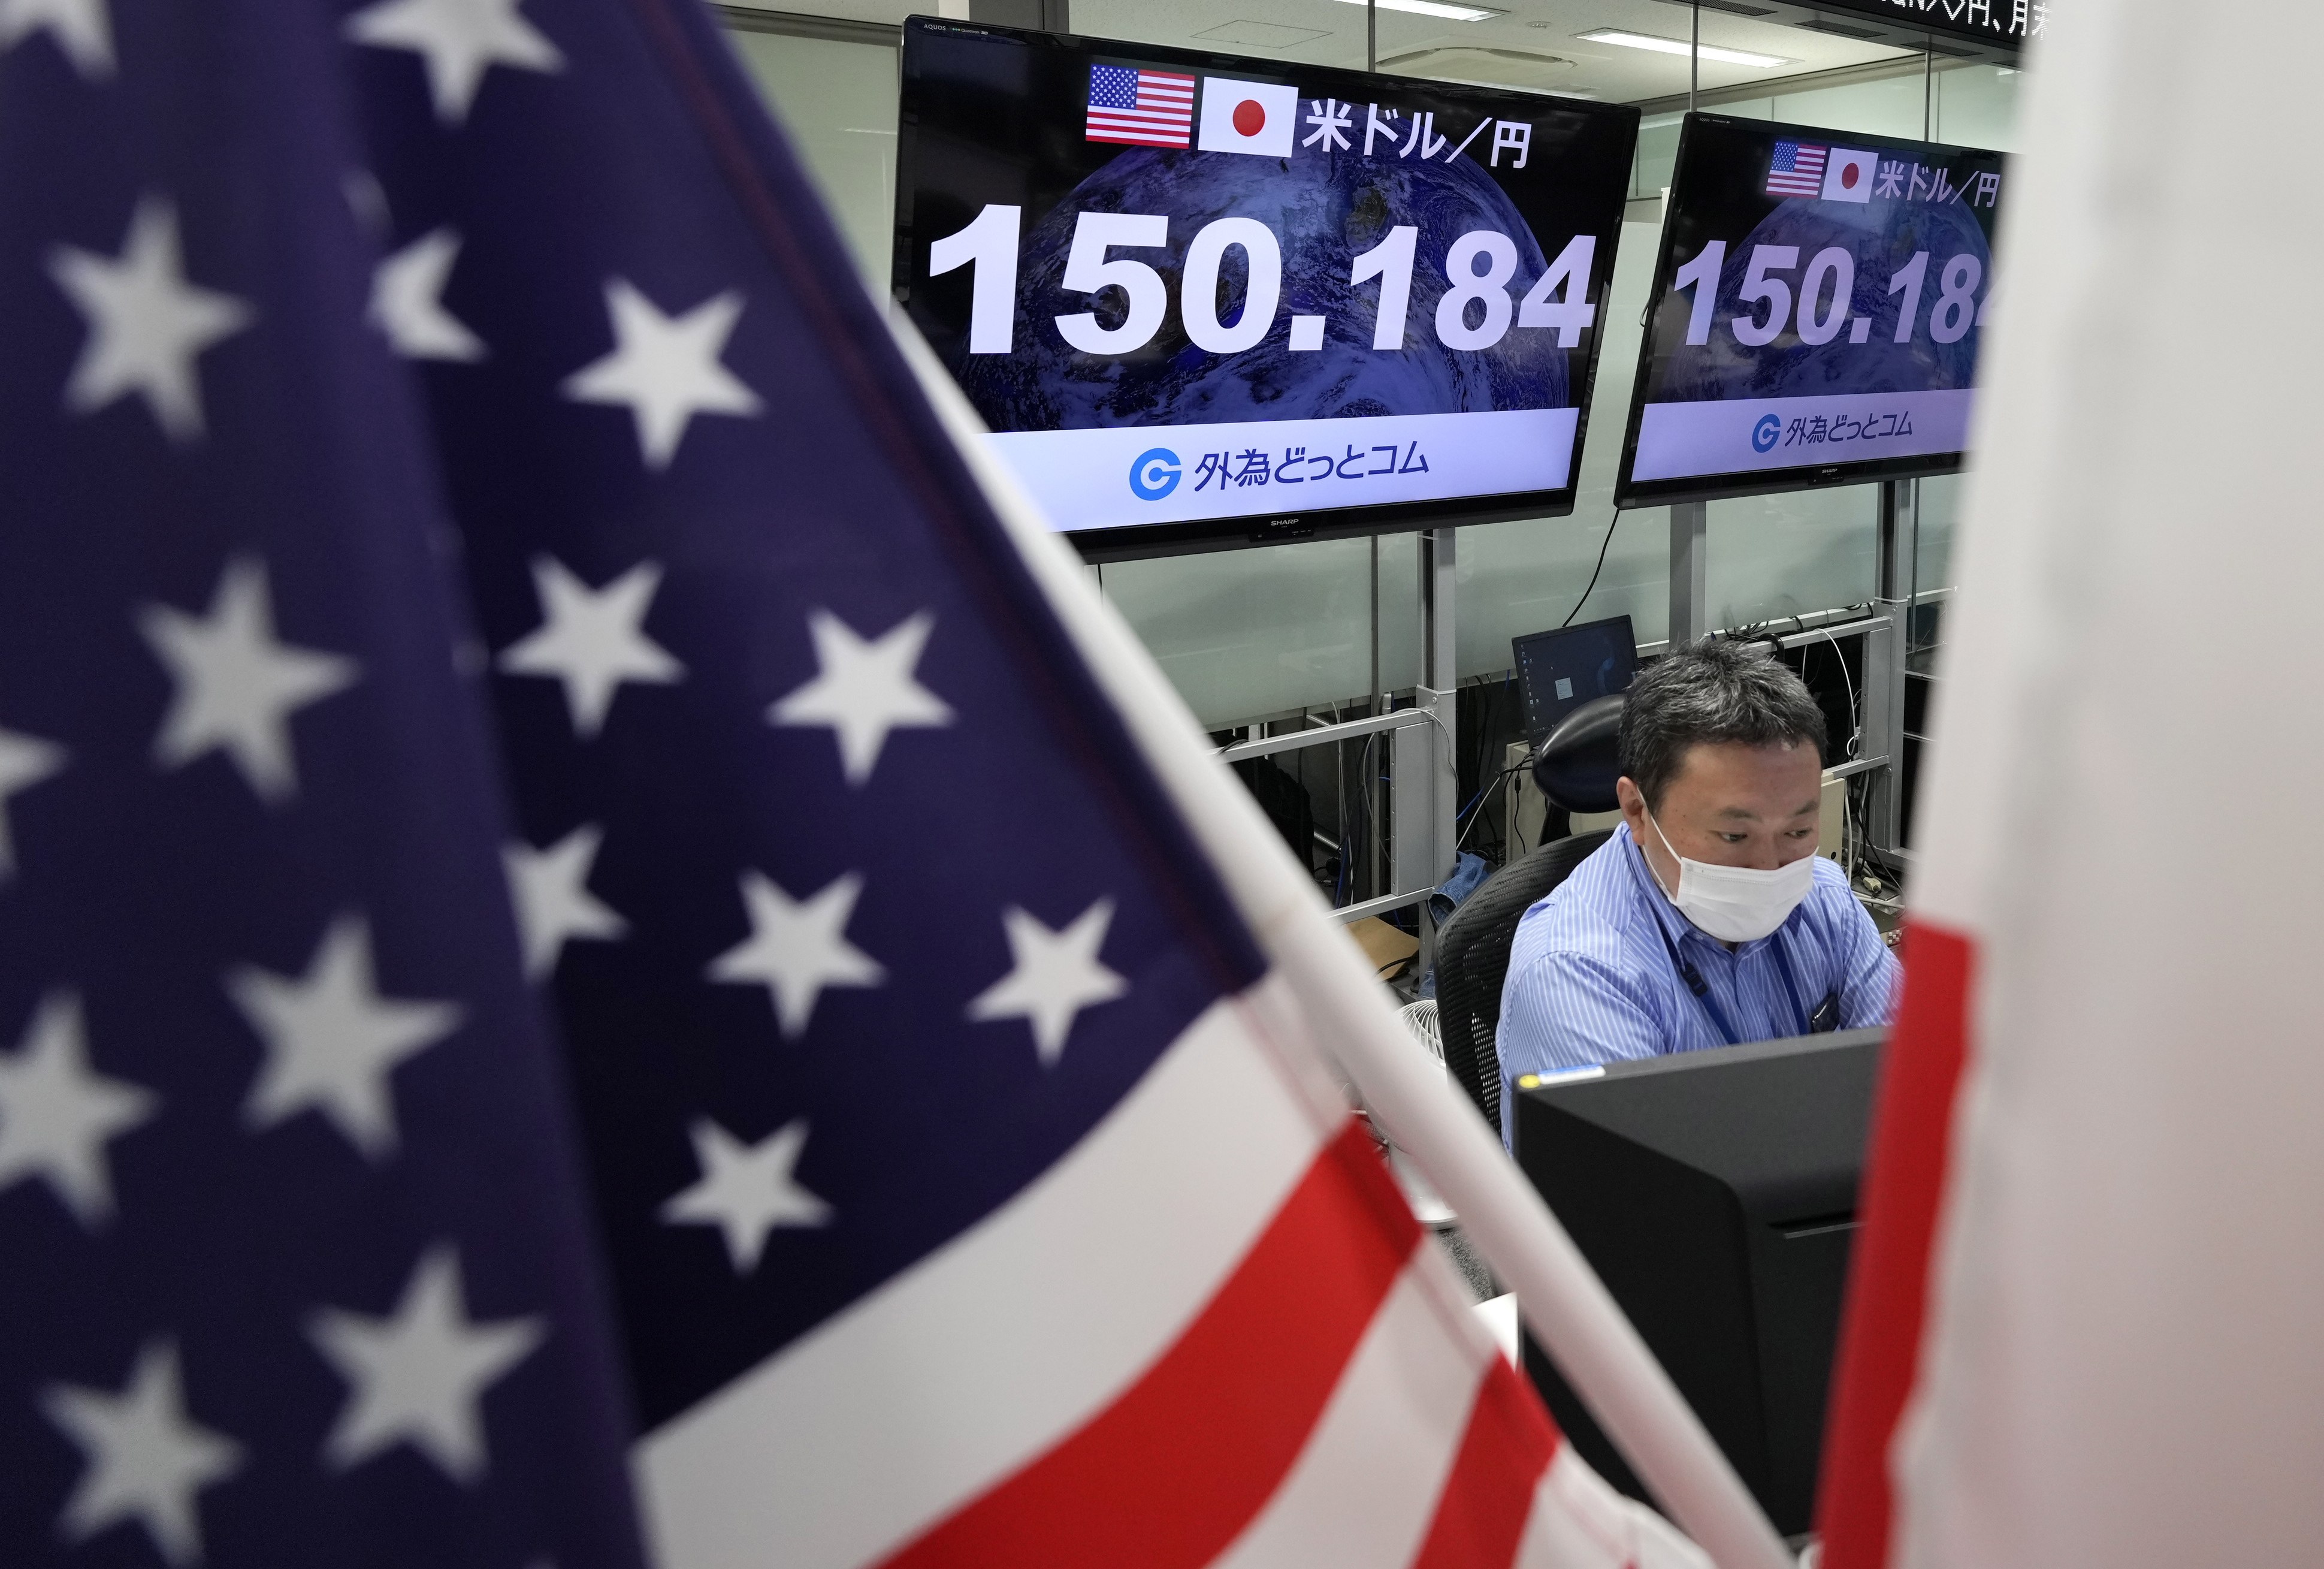 A dealer works as displays show the exchange rate between the Japanese yen and the US dollar at a foreign exchange trading company in Tokyo on October 21, 2022. Photo: EPA-EFE